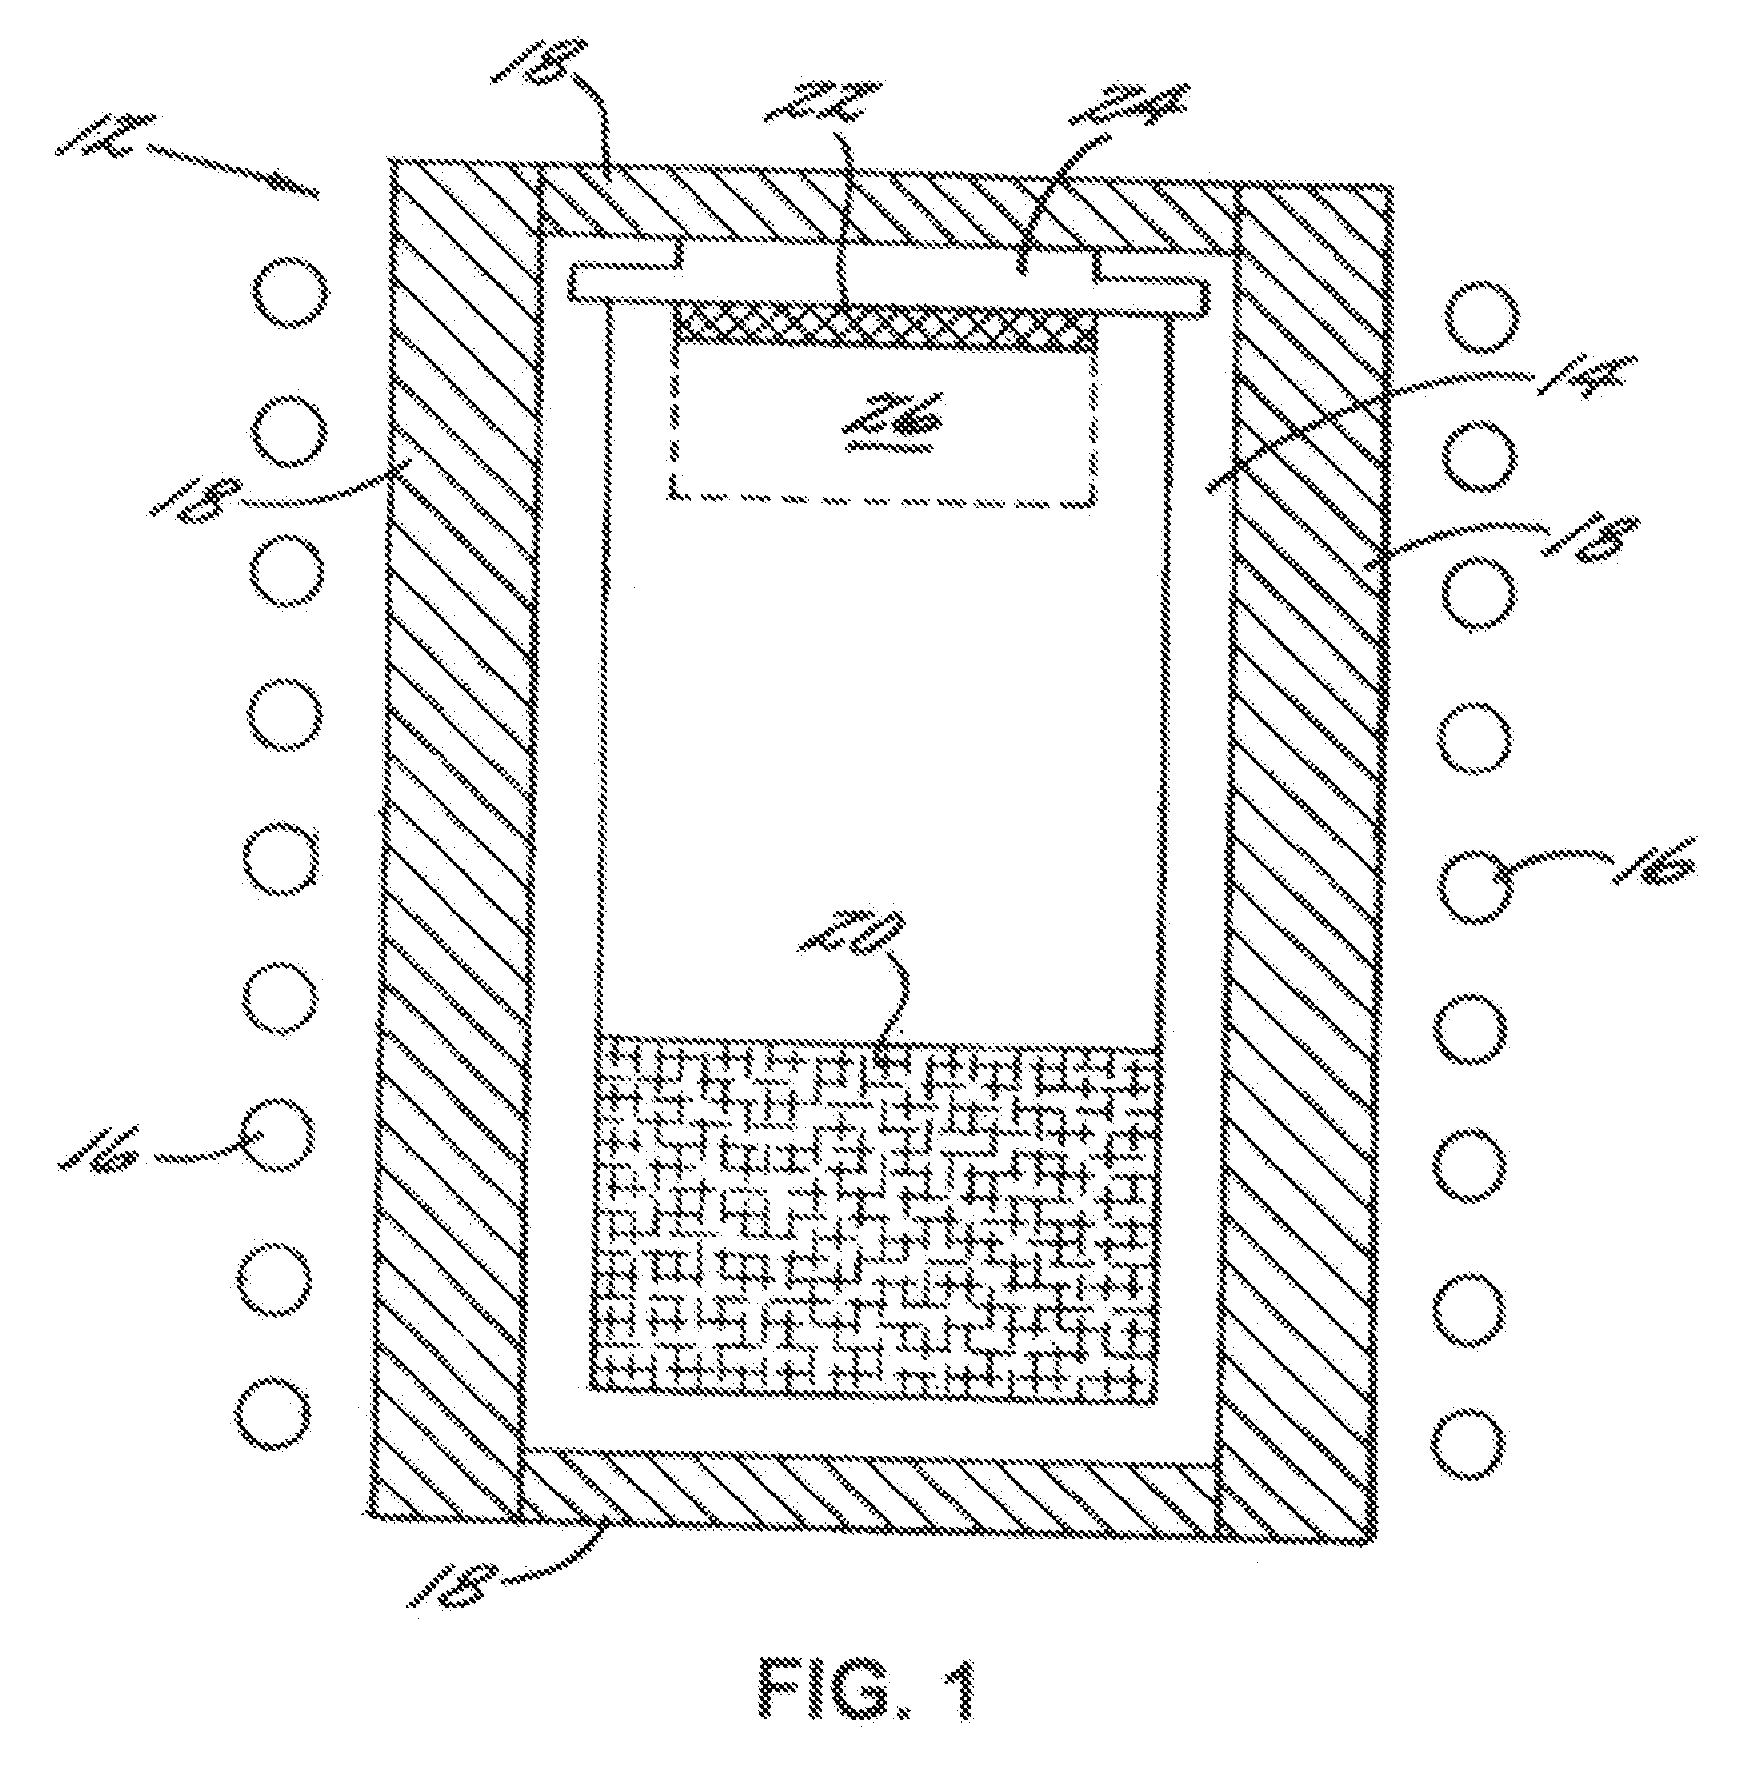 Micropipe-free silicon carbide and related method of manufacture